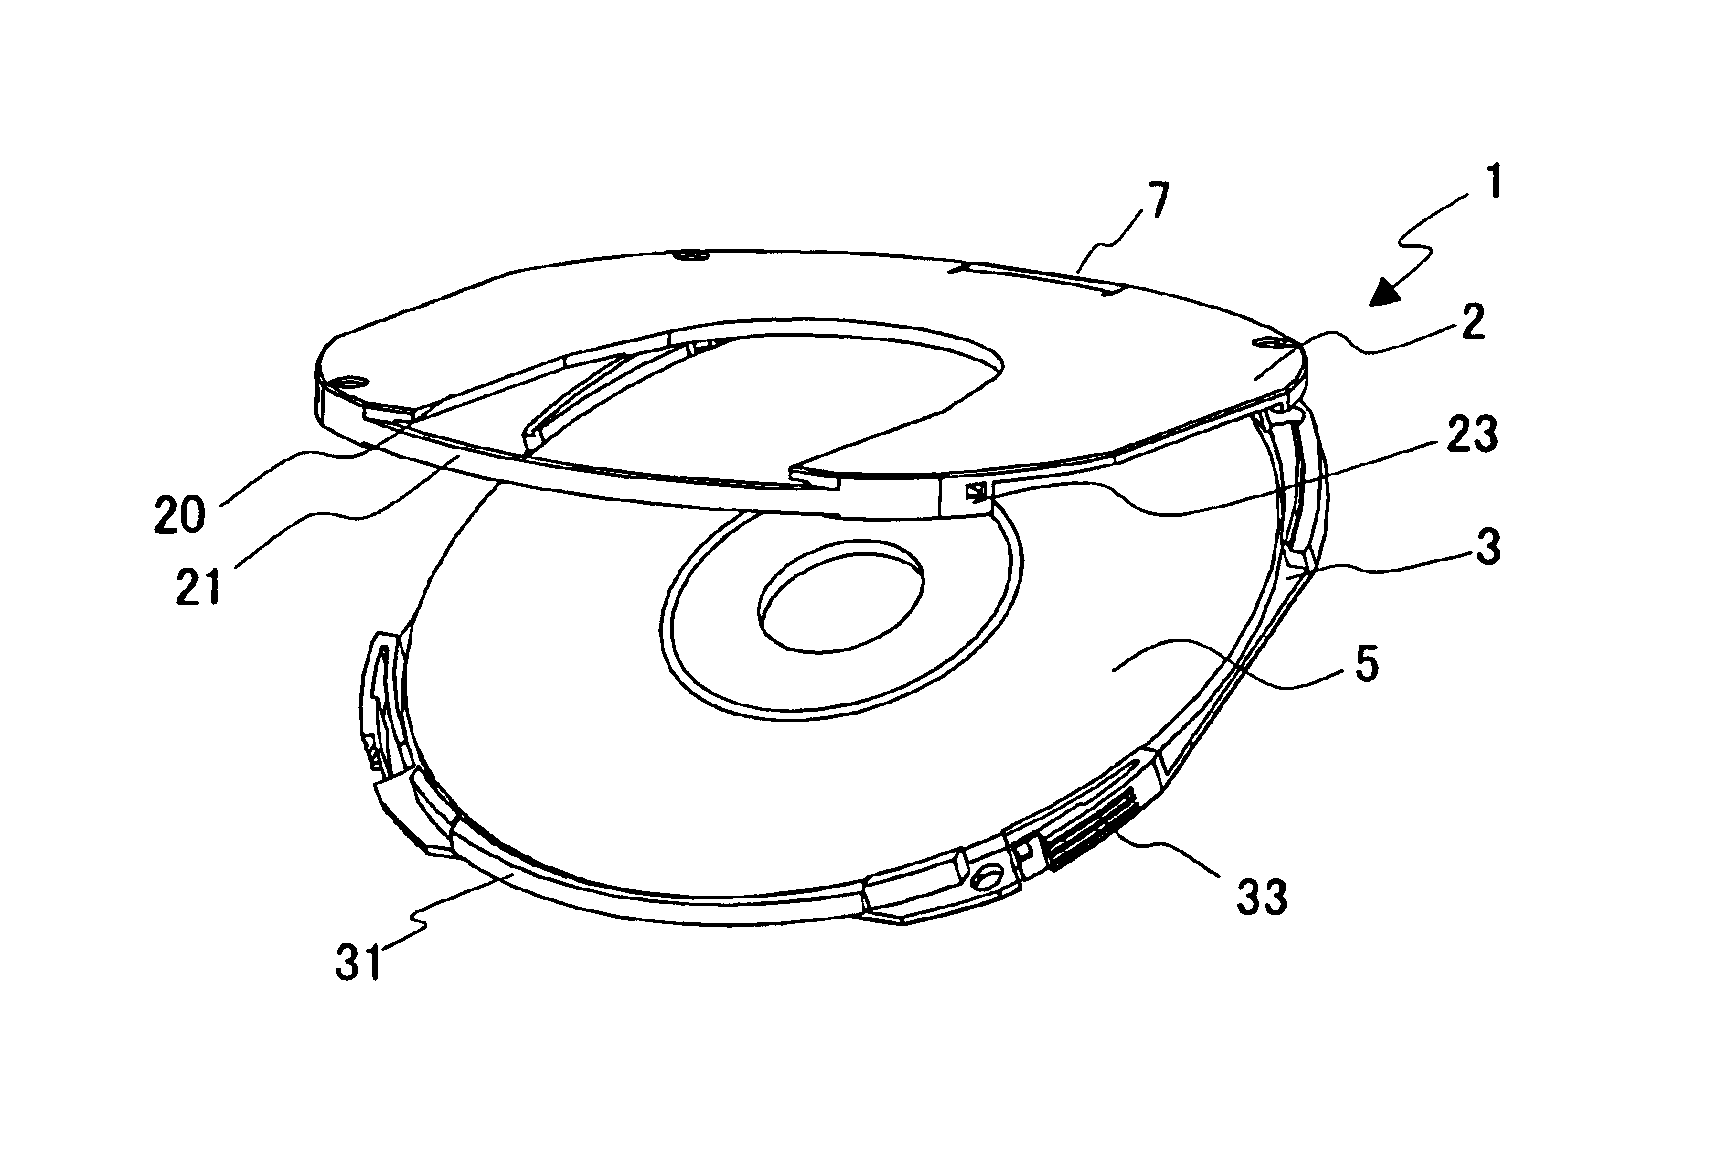 Disk cartridge which accommodates an information-recording disk